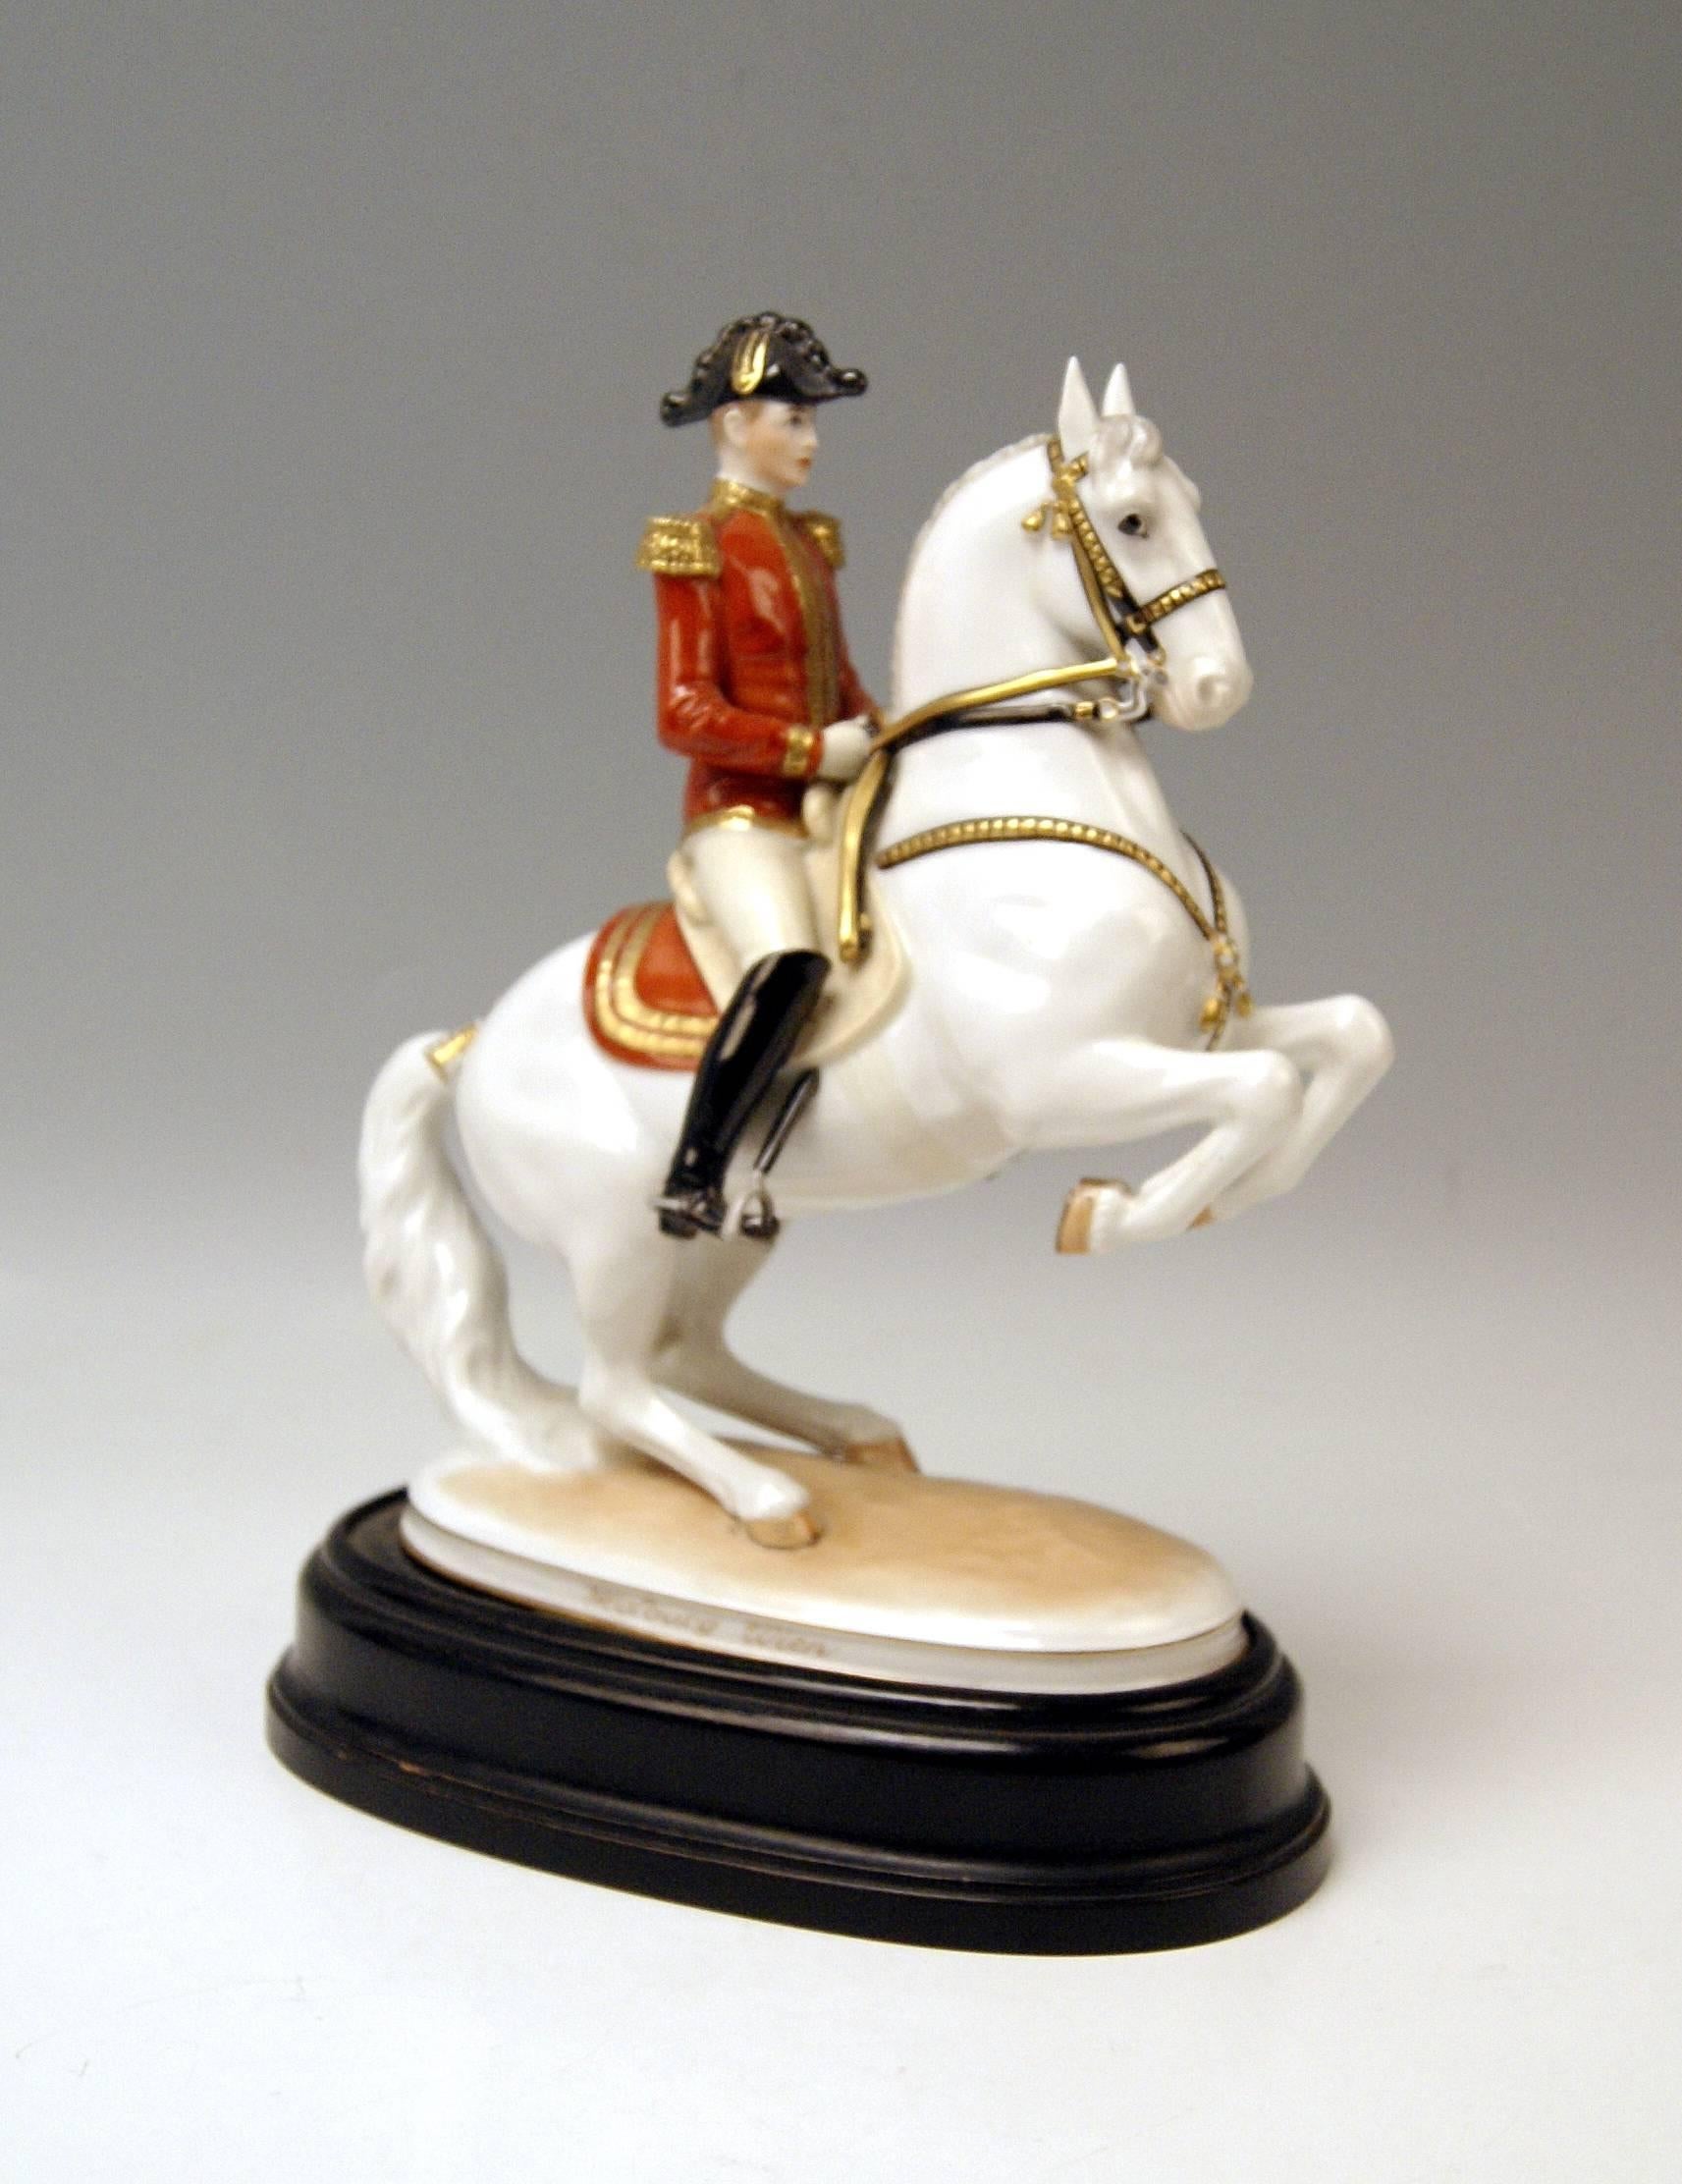 Vienna Augarten Horse Spanish Riding School.
Figurine type: Levade.

The rider conducts the jumping white Lipizzan by the reins. 
The jumping horse depicts a figurine which is called 